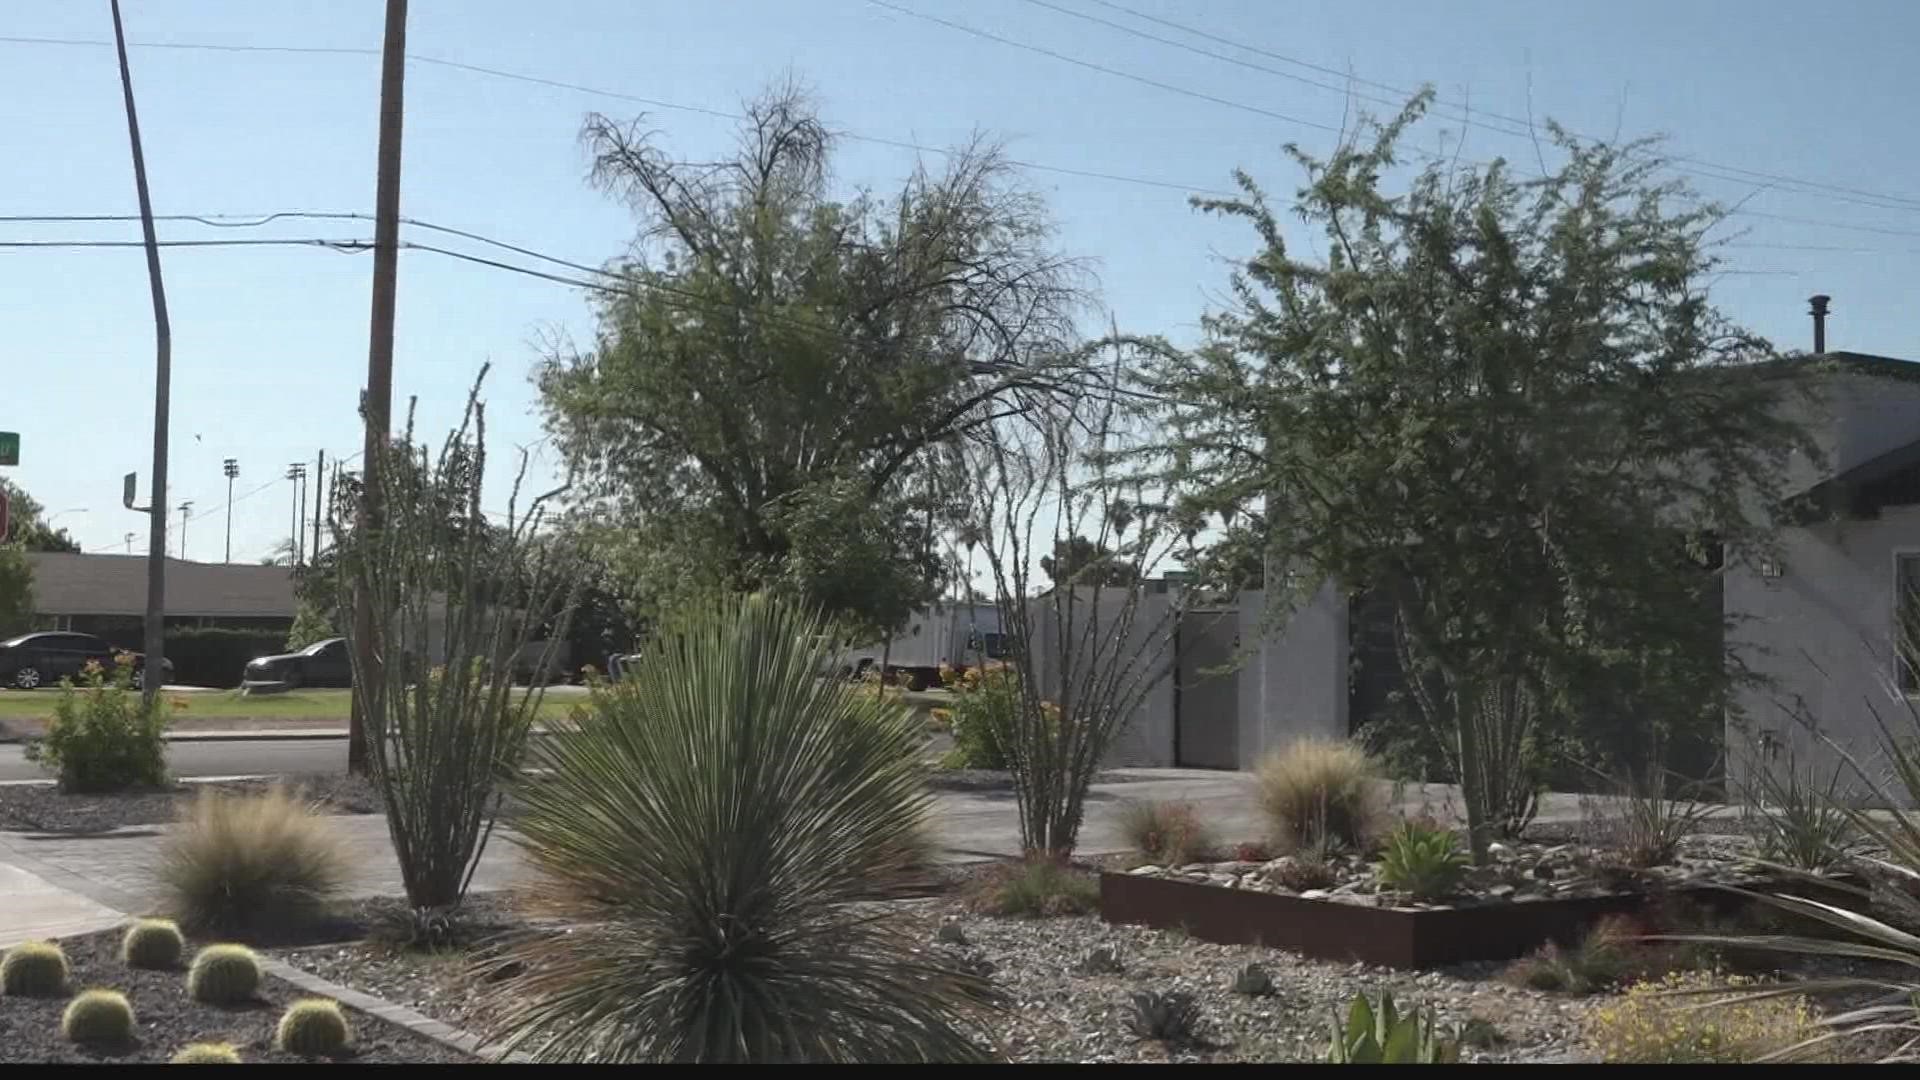 Xeriscaping your home could be beneficial for the environment and your wallet. Jen Wahl has more on how you can adopt a more drought-tolerant landscape at your home.